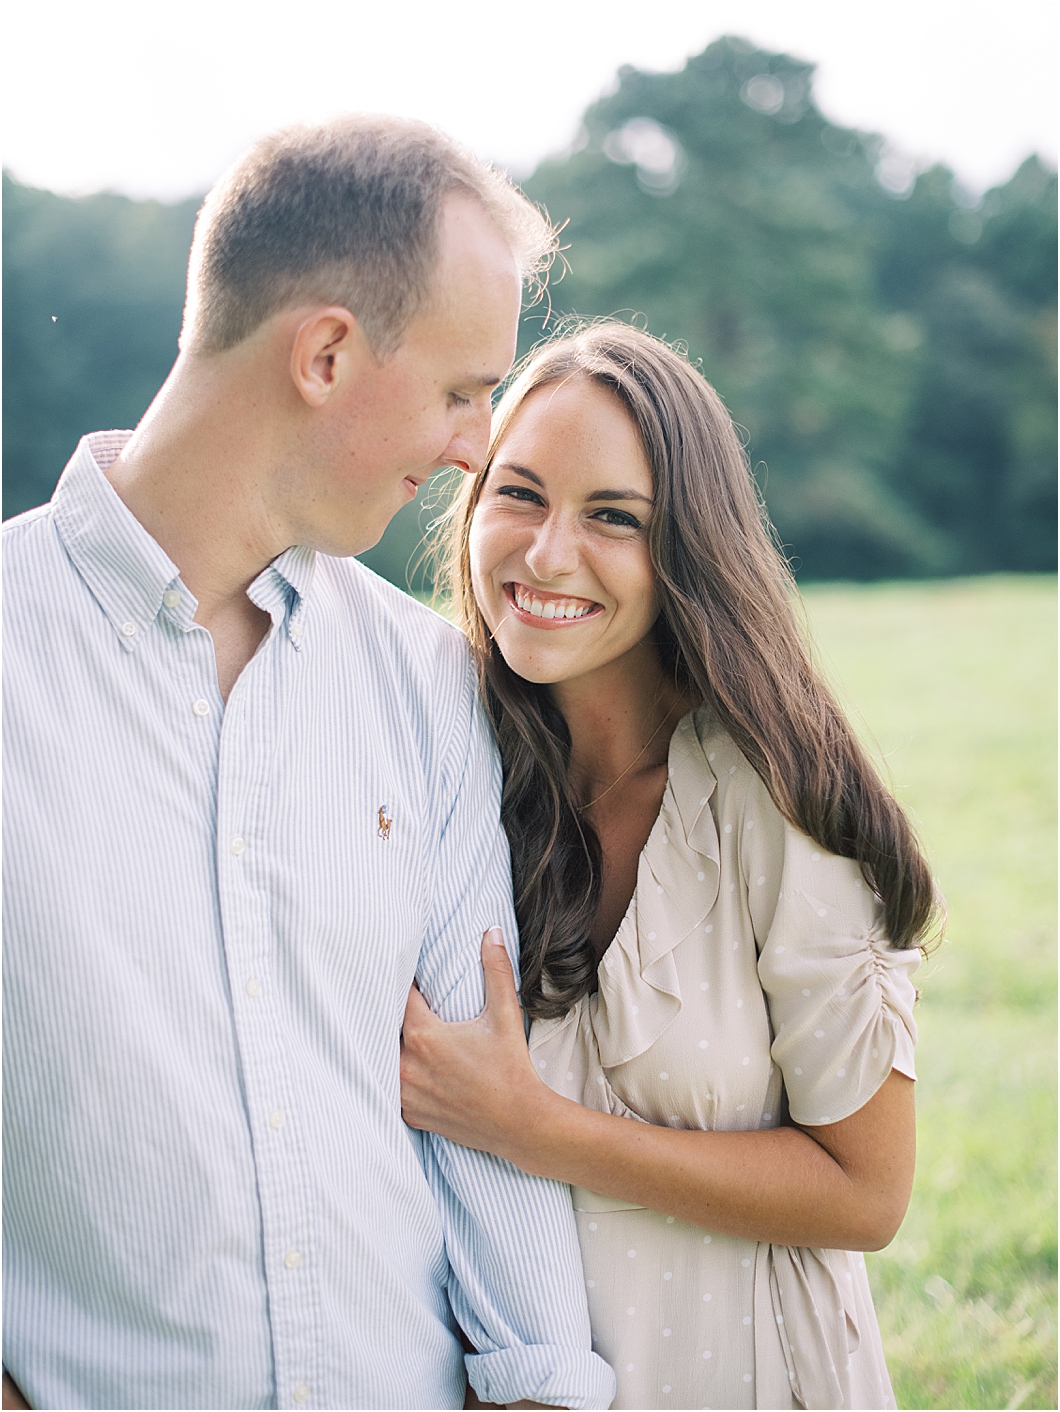 Farm Engagement Photos in Charlotte North Carolina by Hillary Muelleck